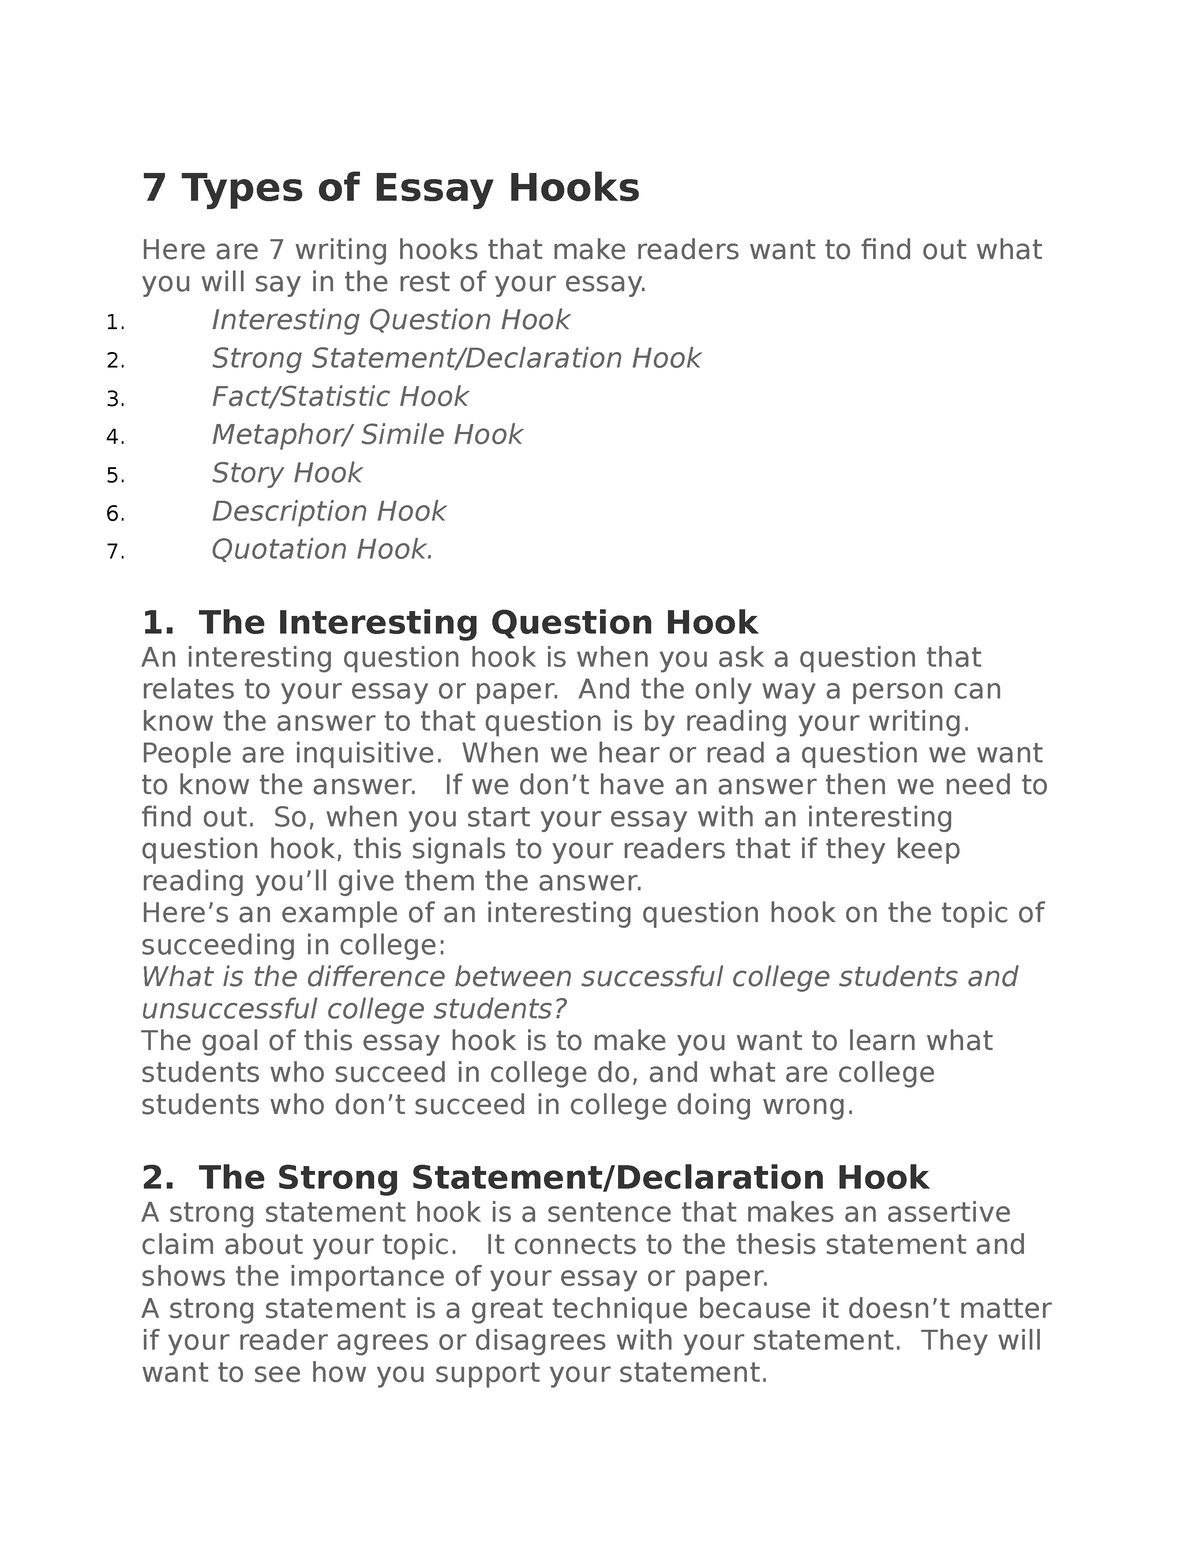 7 Types of Essay Hooks - 7 Types of Essay Hooks Here are 7 writing